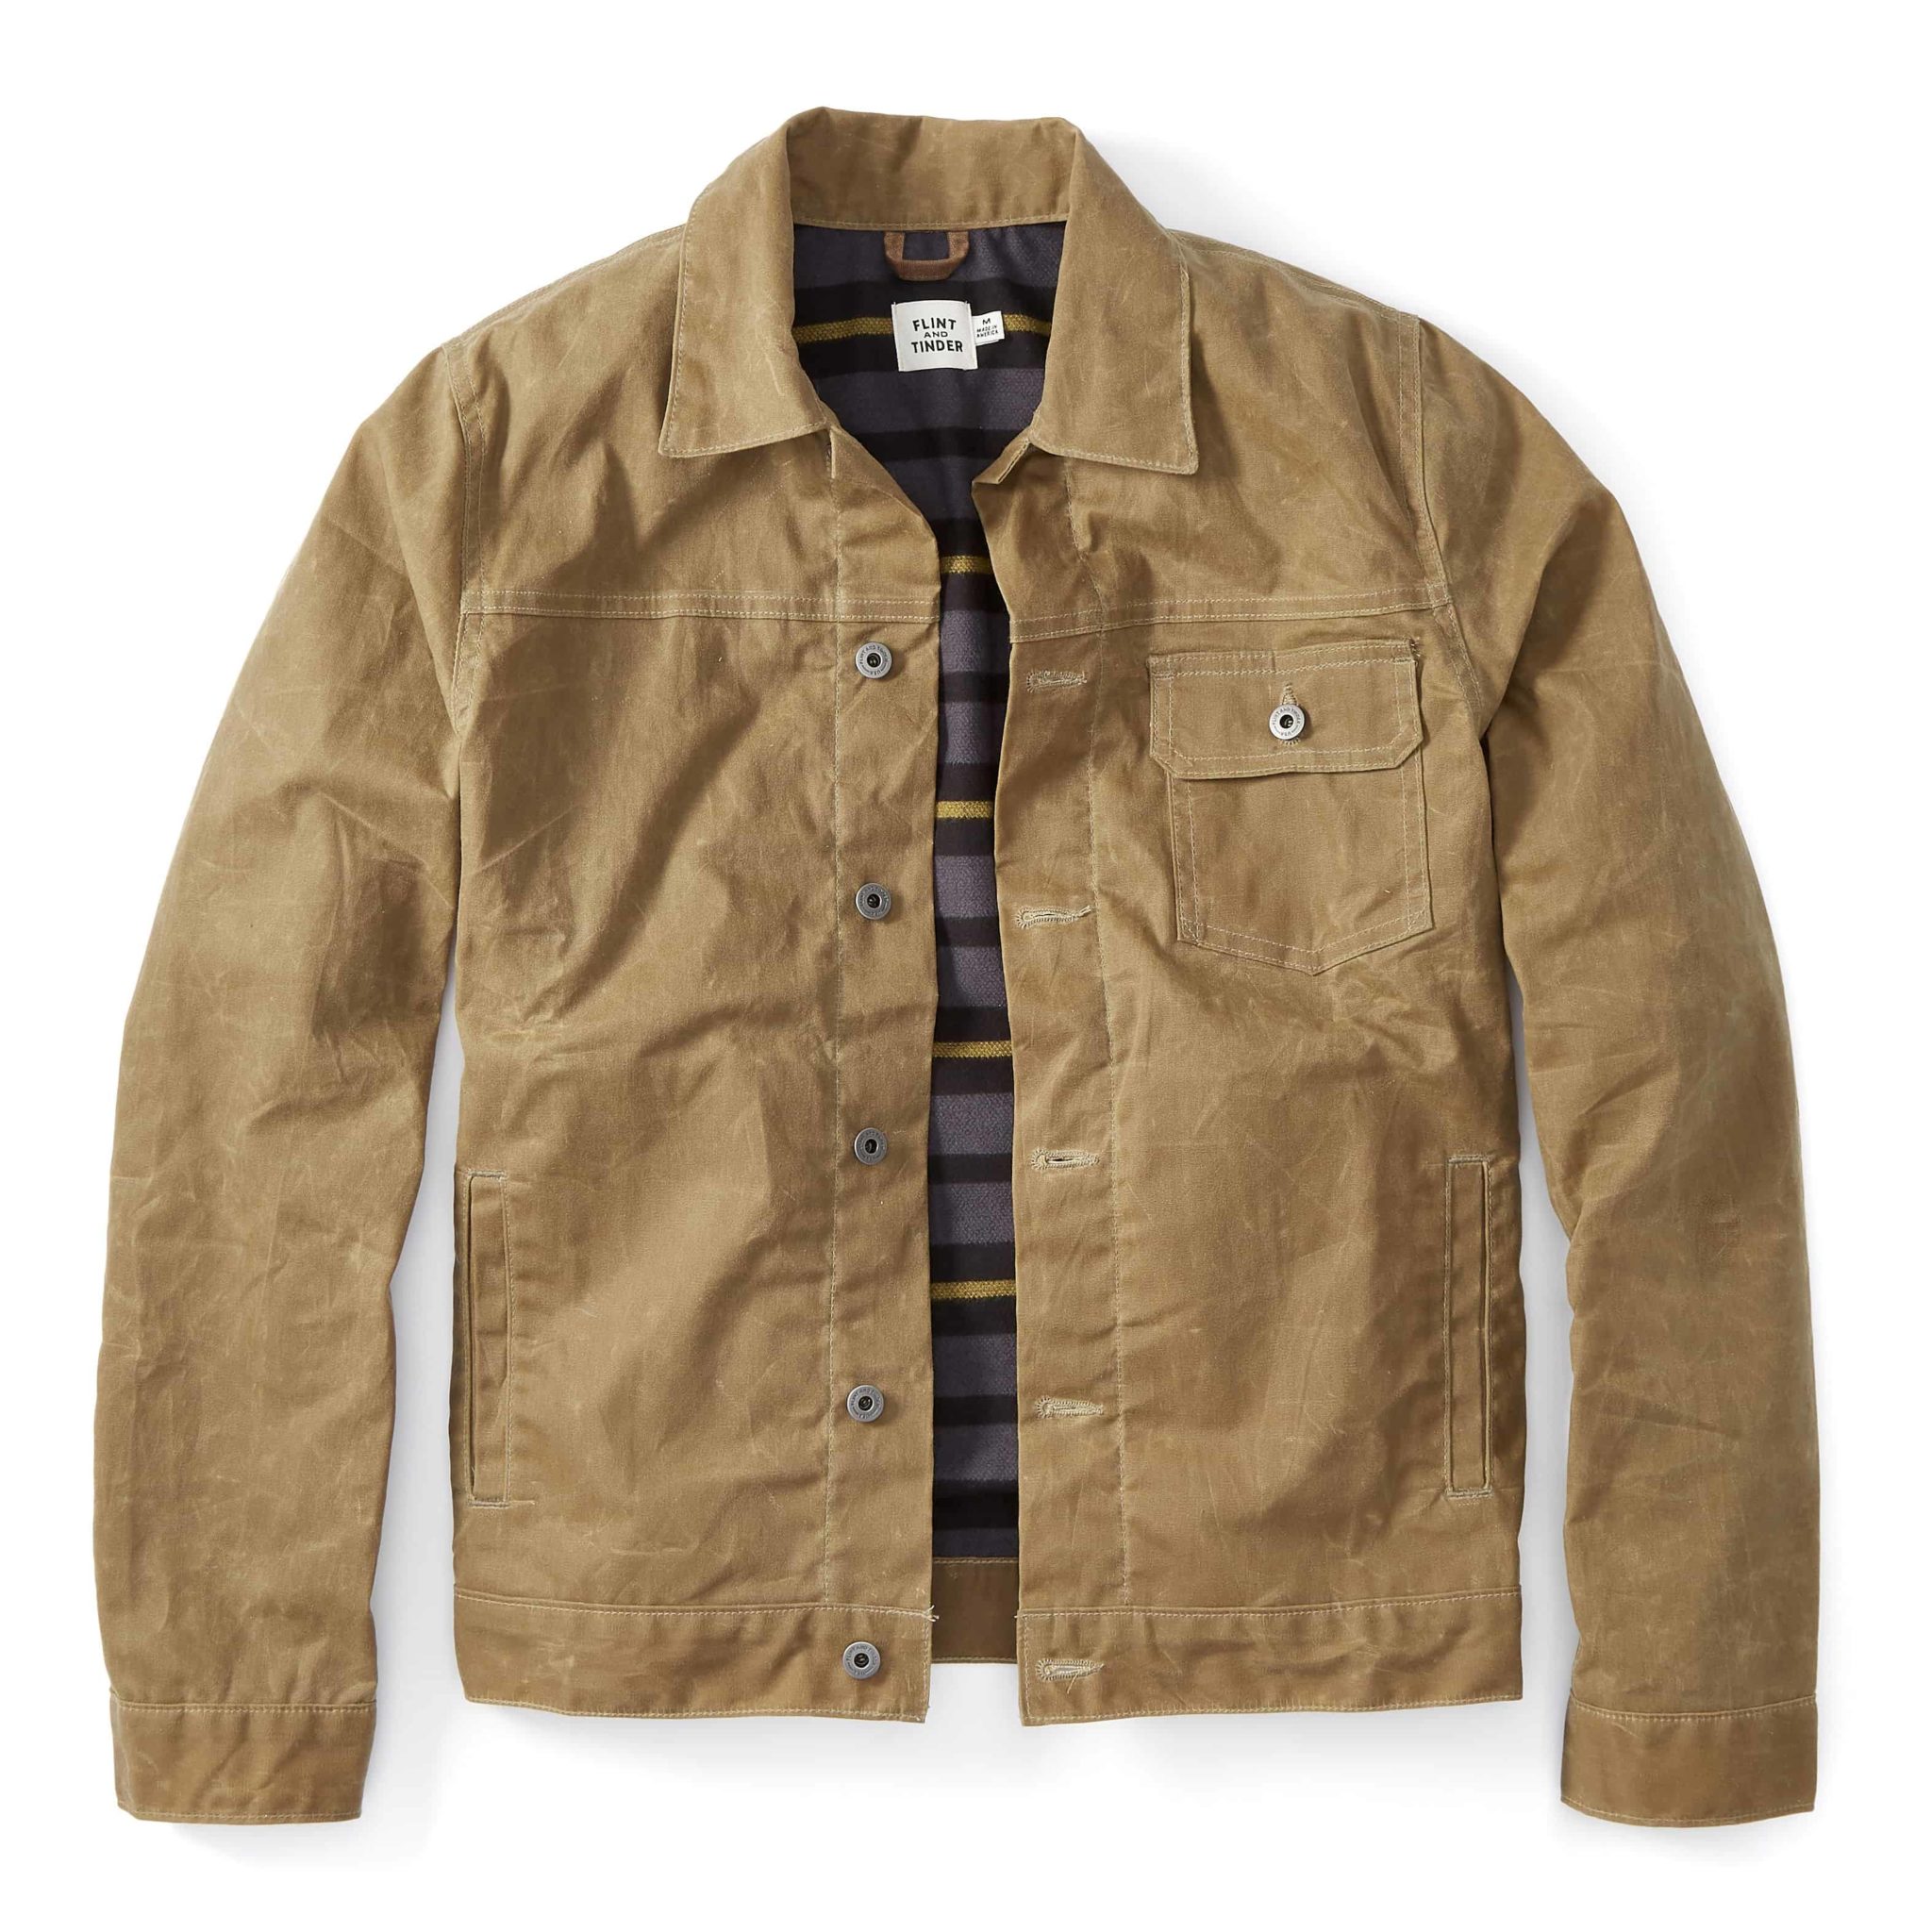 Huckberry Clothing Review - Must Read This Before Buying